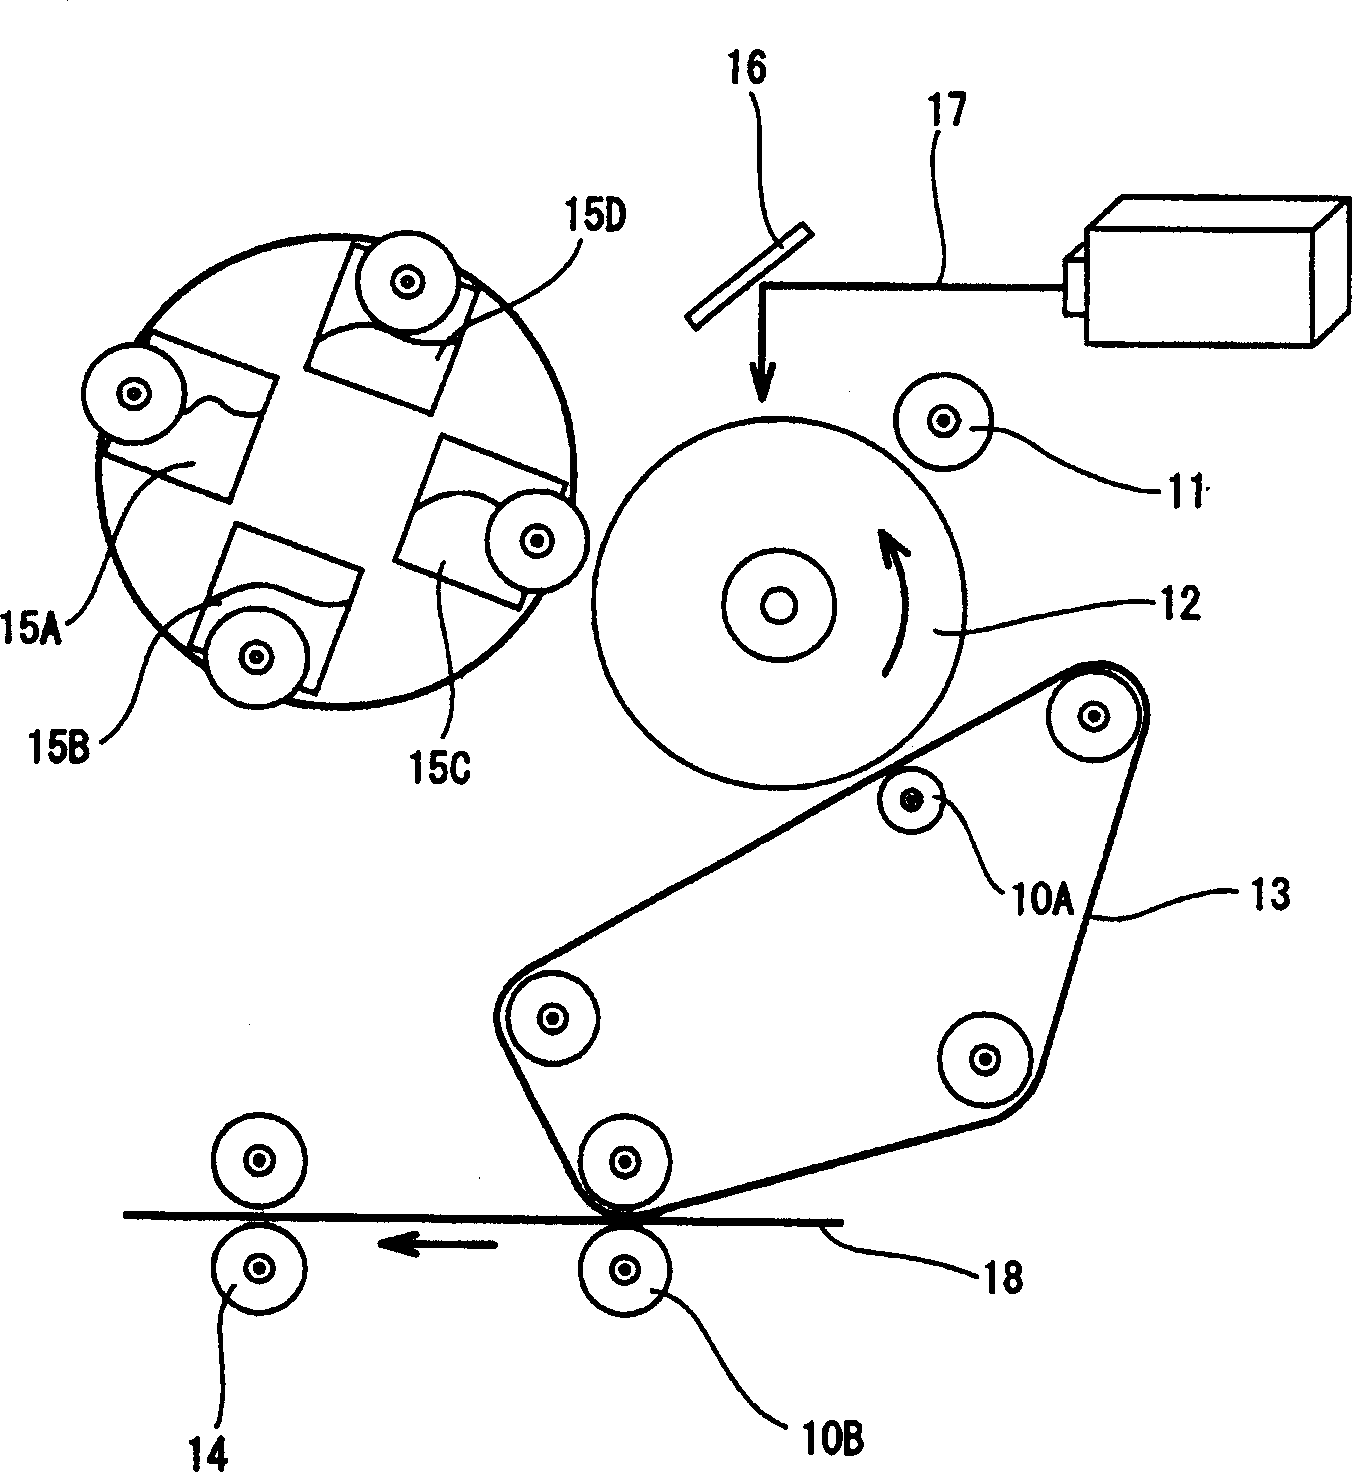 Conductive roller and image-forming apparatus having conductive roller